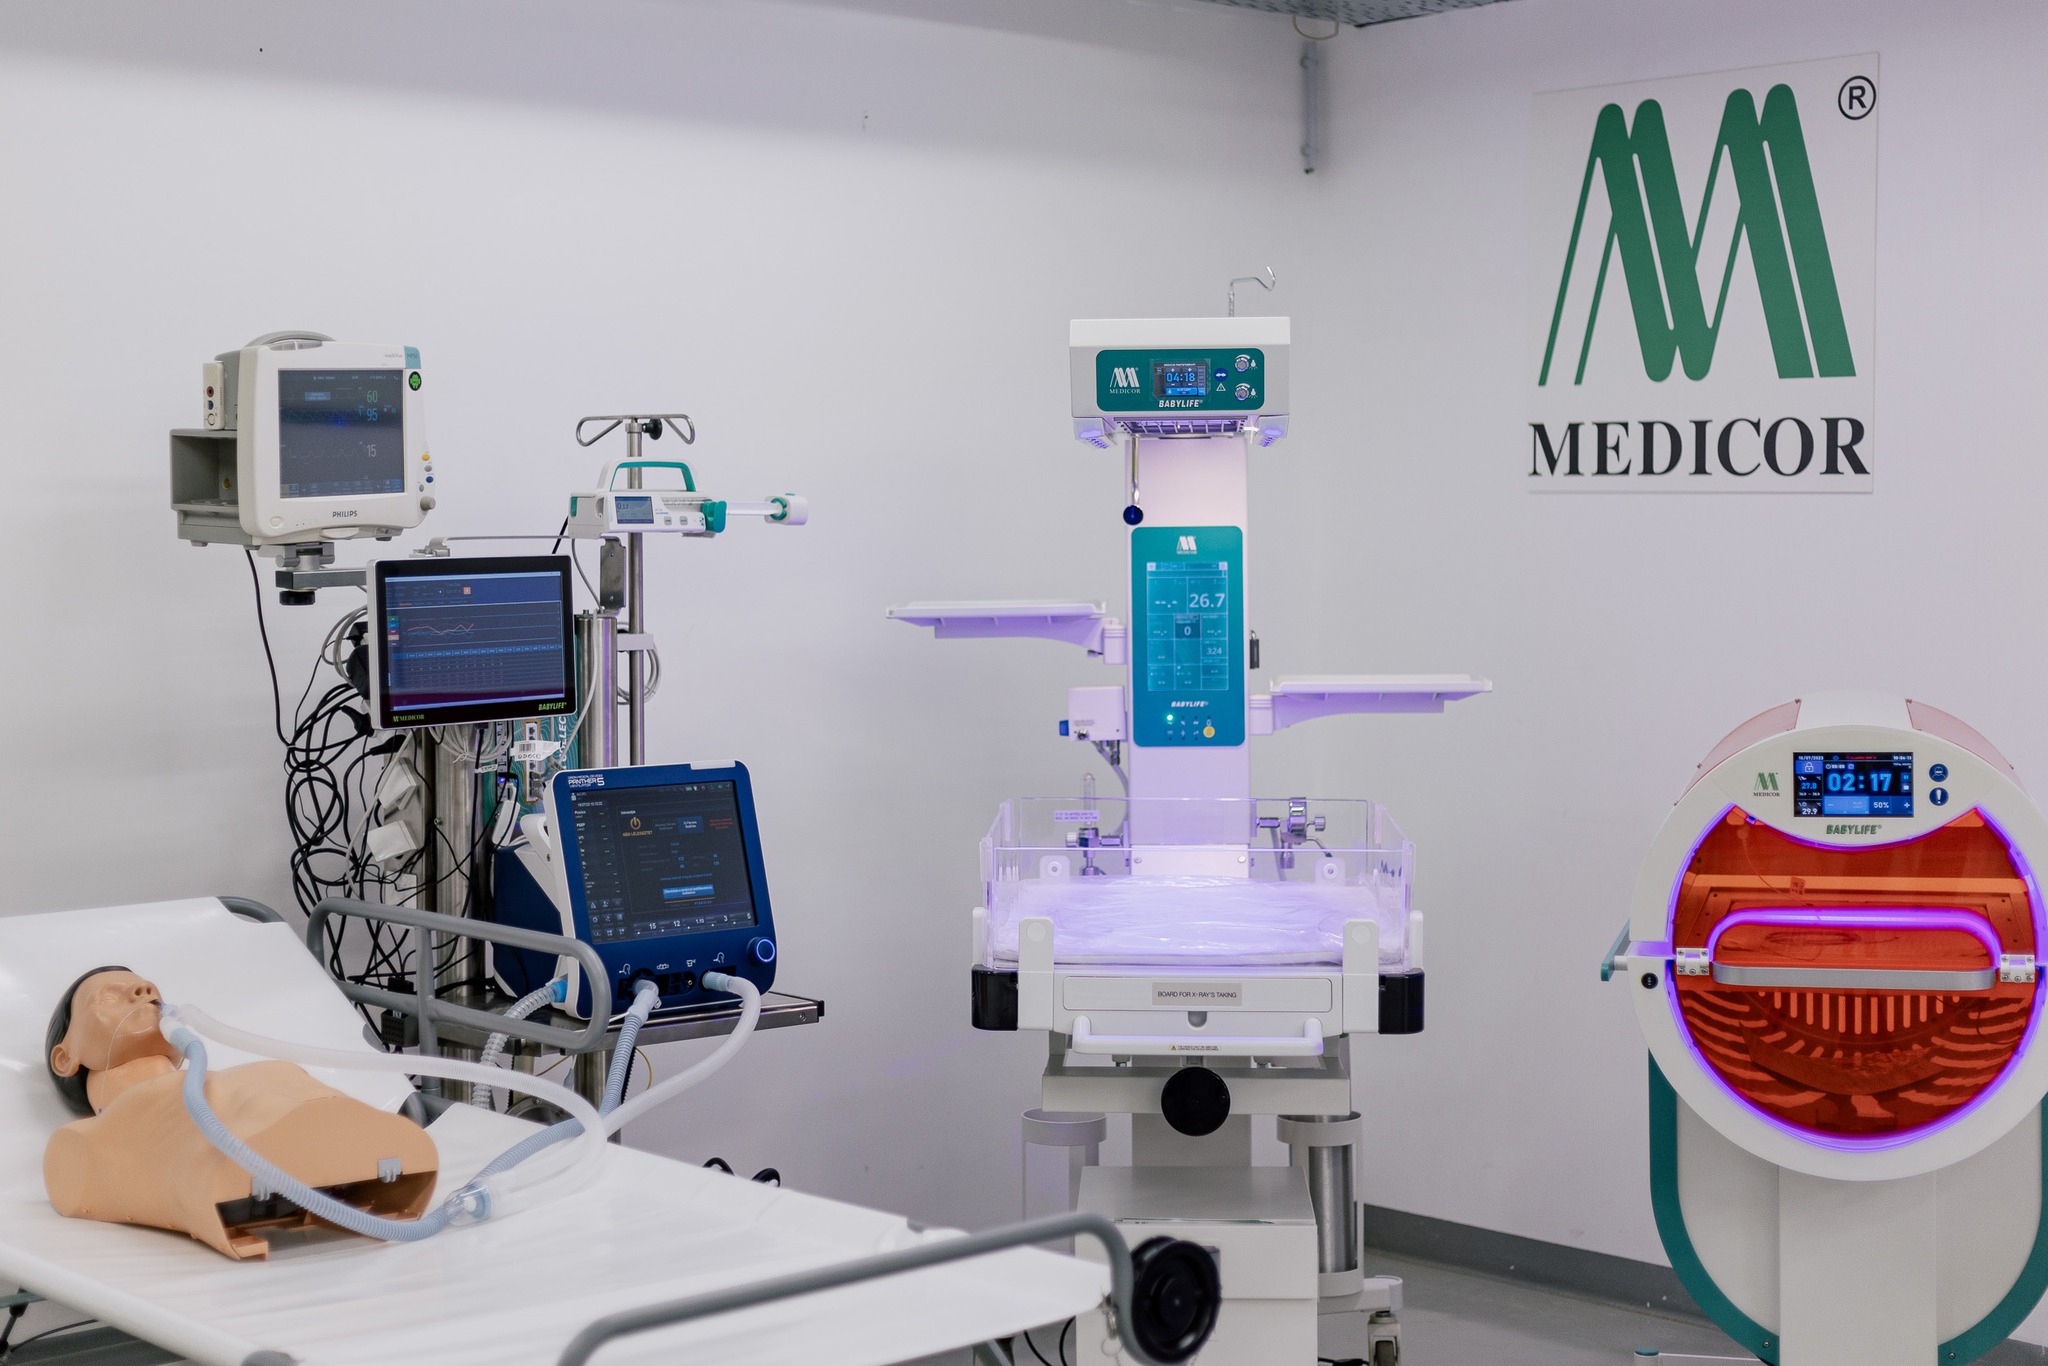 Local Innovations: Hungary is Becoming More Self-Sufficient in Medical Equipment